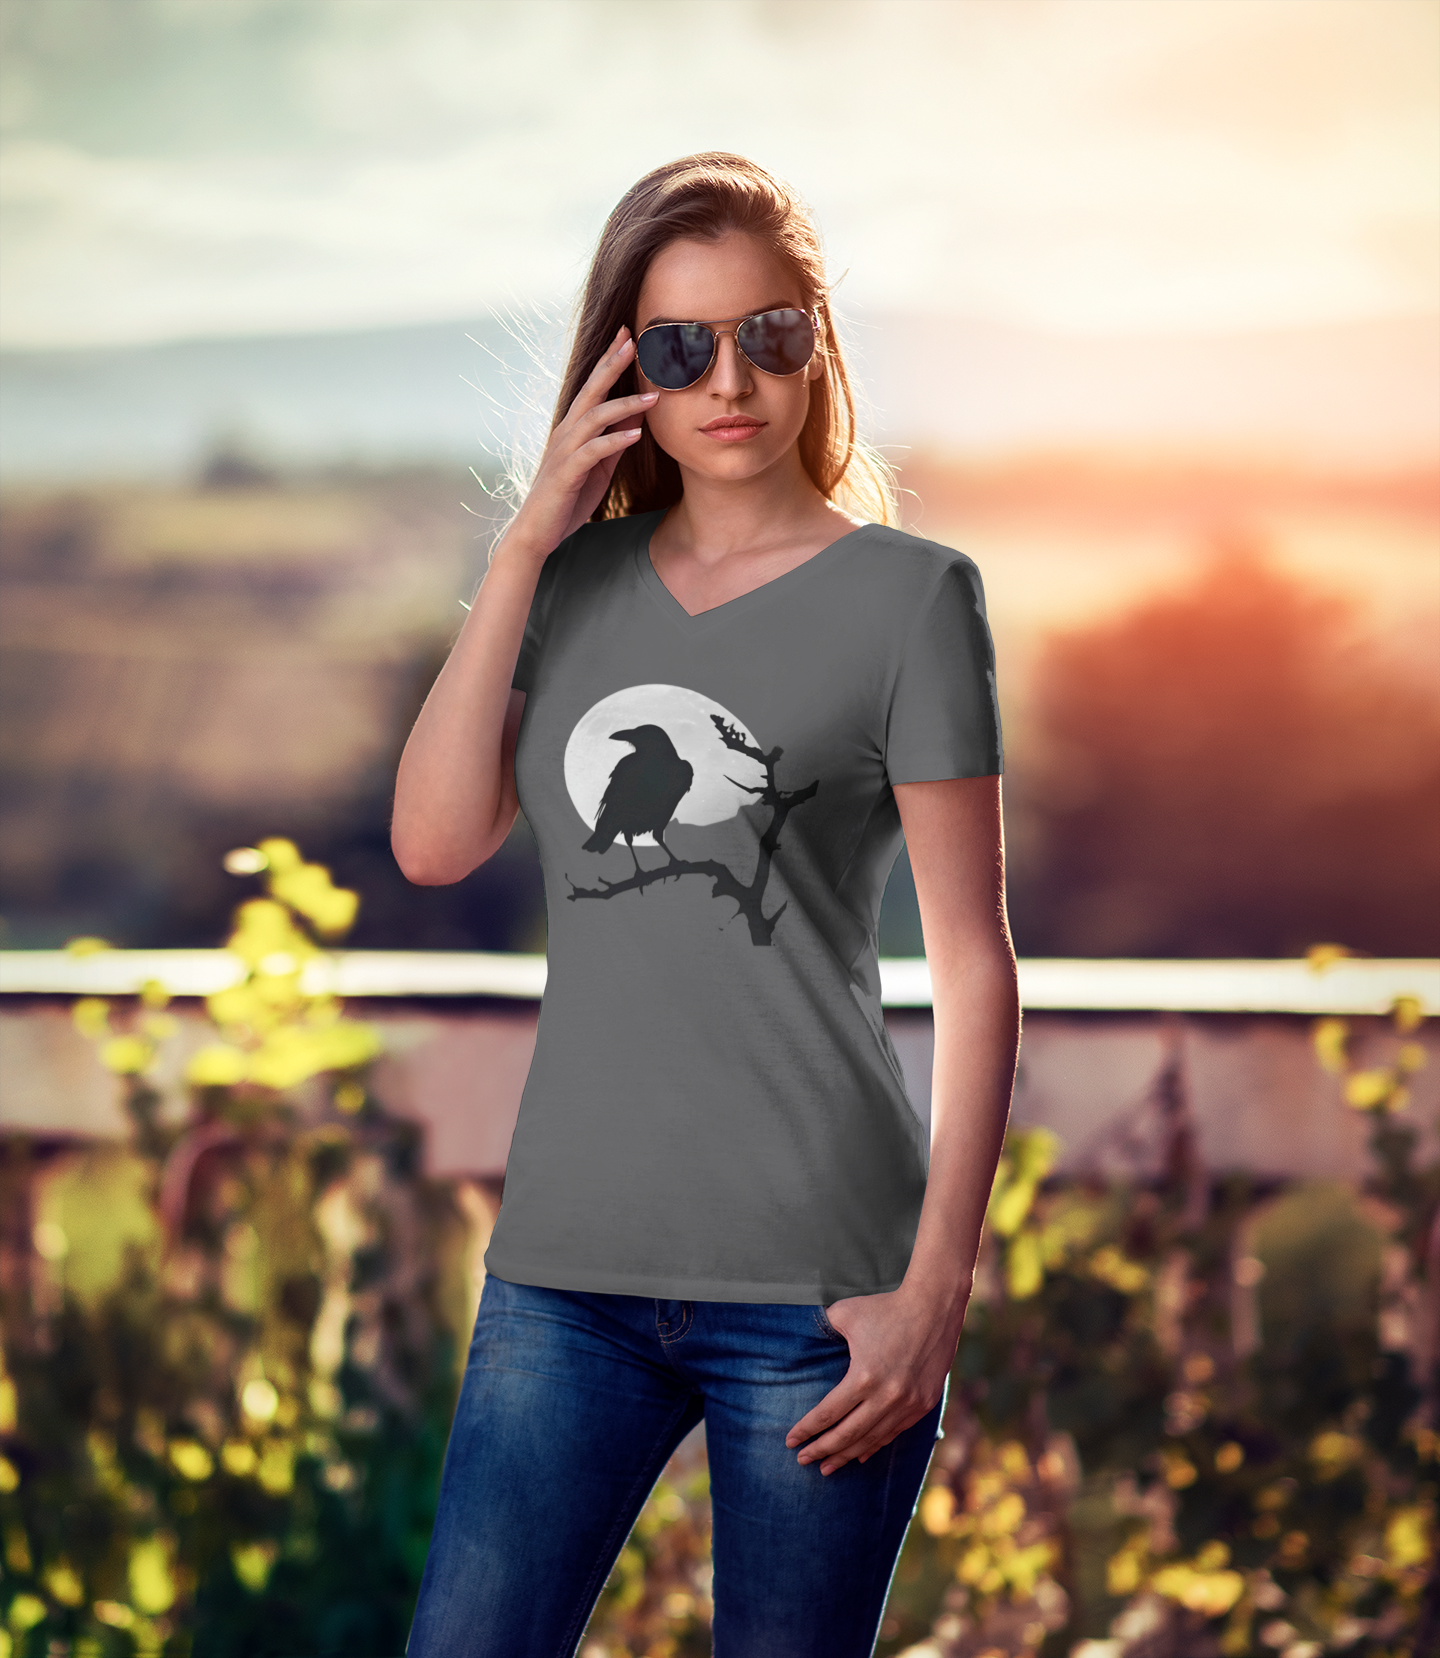 Crow Silhouette V-Neck Tees